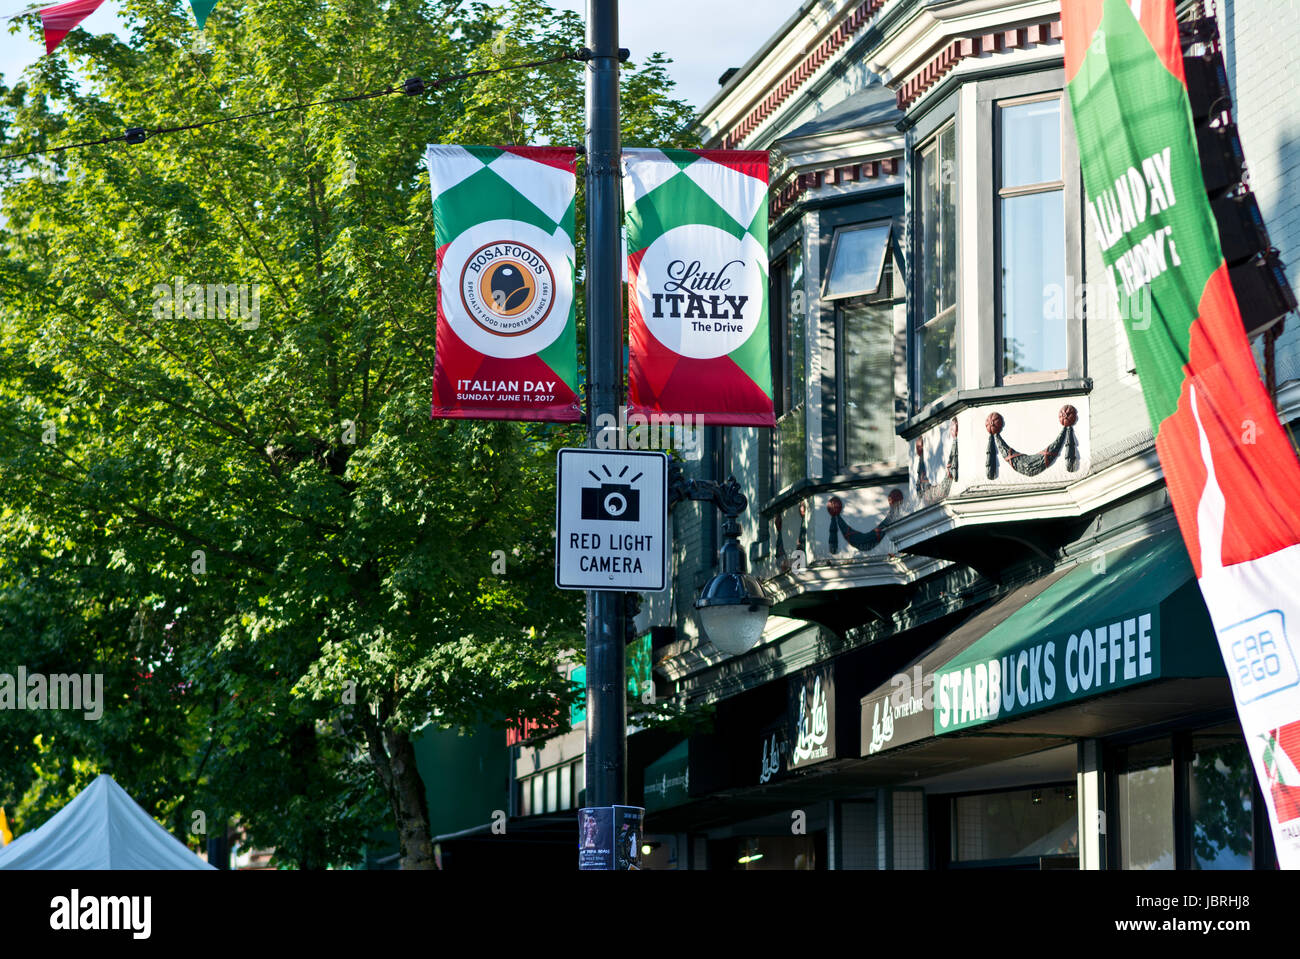 Vancouver, BC, Canada. 11th June, 2017. Colourful banners on Commercial Drive in Vancouver seen at this year's 'Italian Day on the Drive'. The annual Italian street festival is located in Vancouver's 'Little Italy' in the Grandview-Woodland neighbourhod, and draws large crowds. Credit: Maria Janicki/Alamy Stock Photo